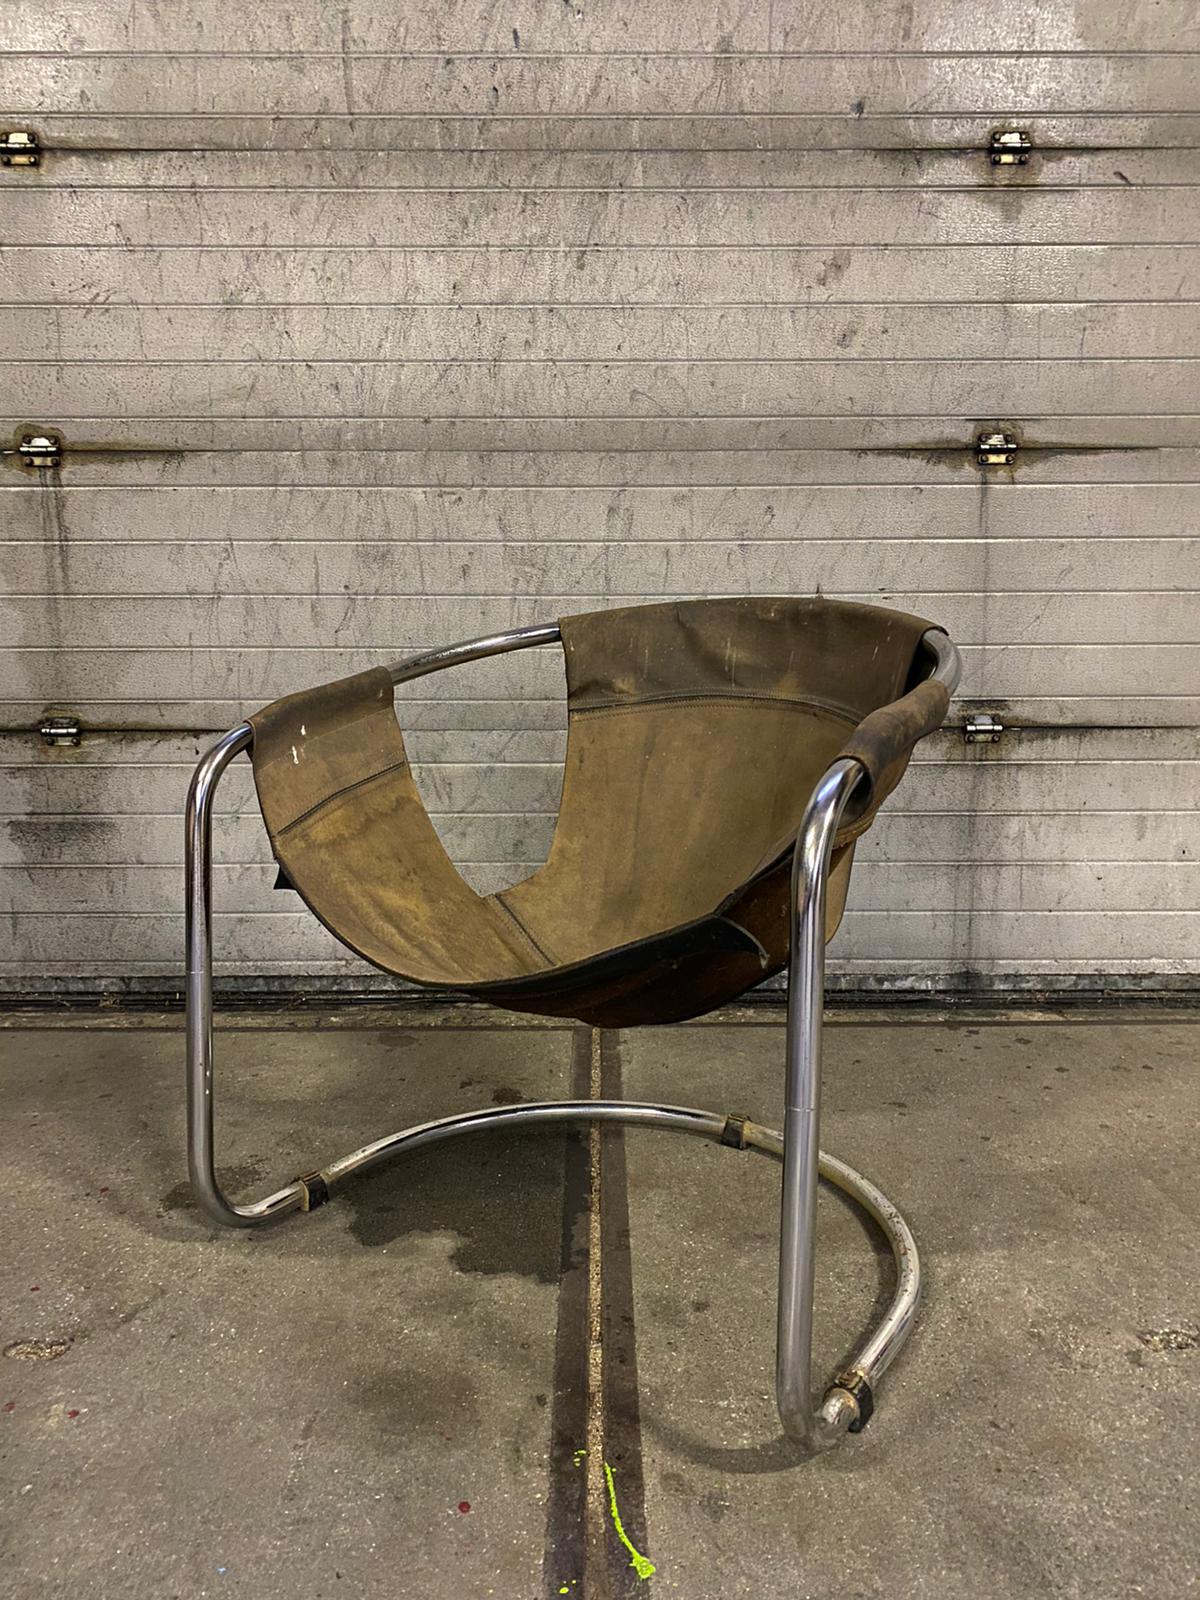 Dutch design armchair designed by Clemens Claessen for Ba-As Eindhoven, NL. The chair features a chrome tubular base which consists of two parts. It’s seating was made from thick saddle leather which shows some heavy wear as overall stains, some